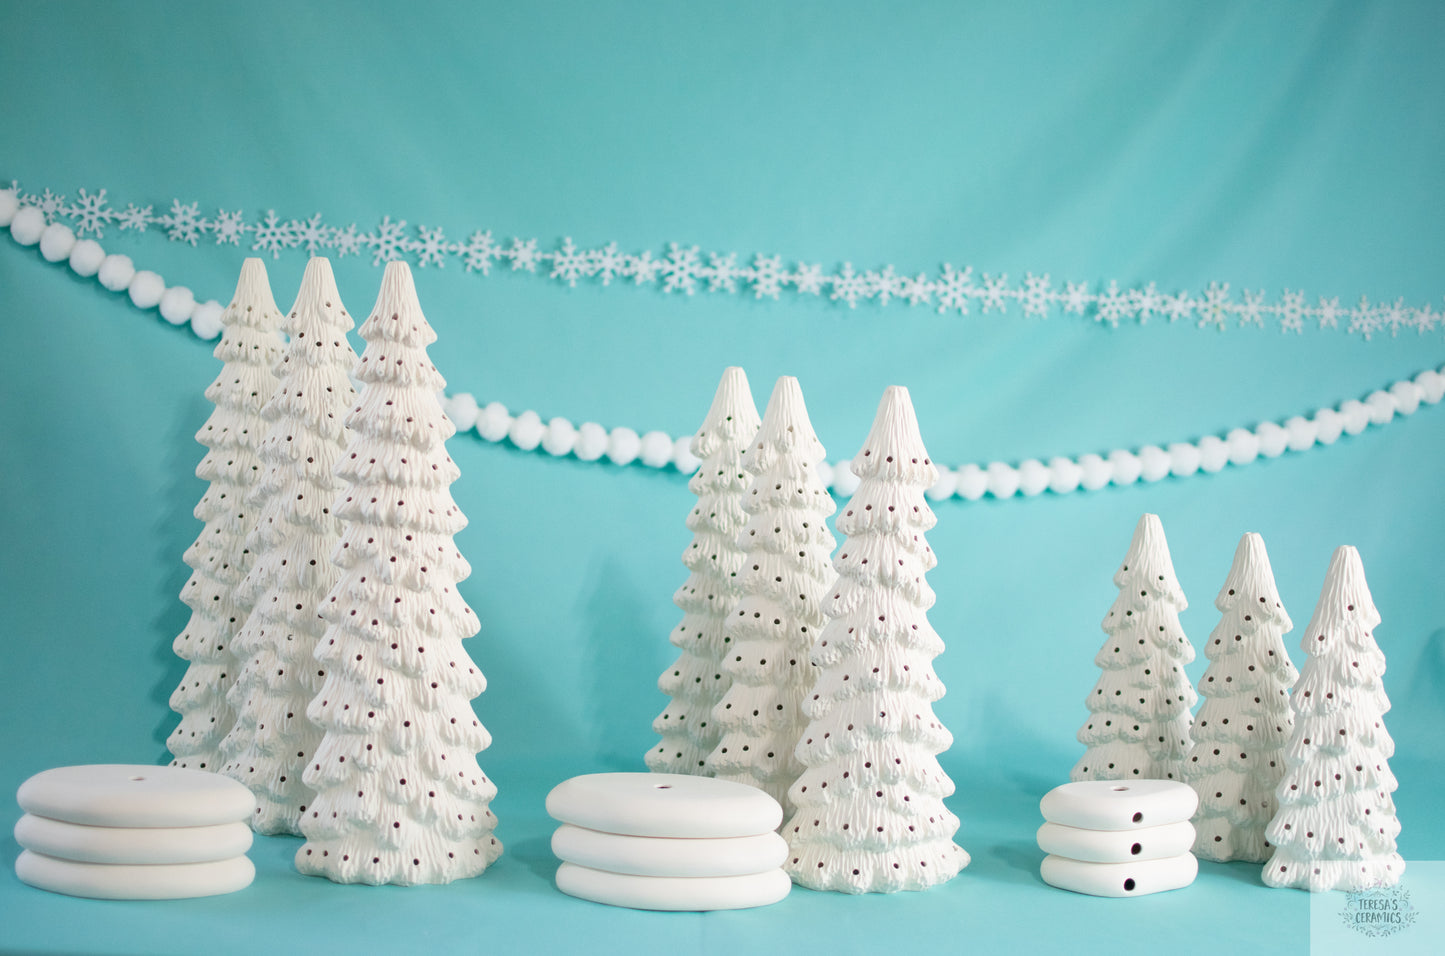  Ready to Paint DIY Ceramic Bisque Tree Shape Ornaments